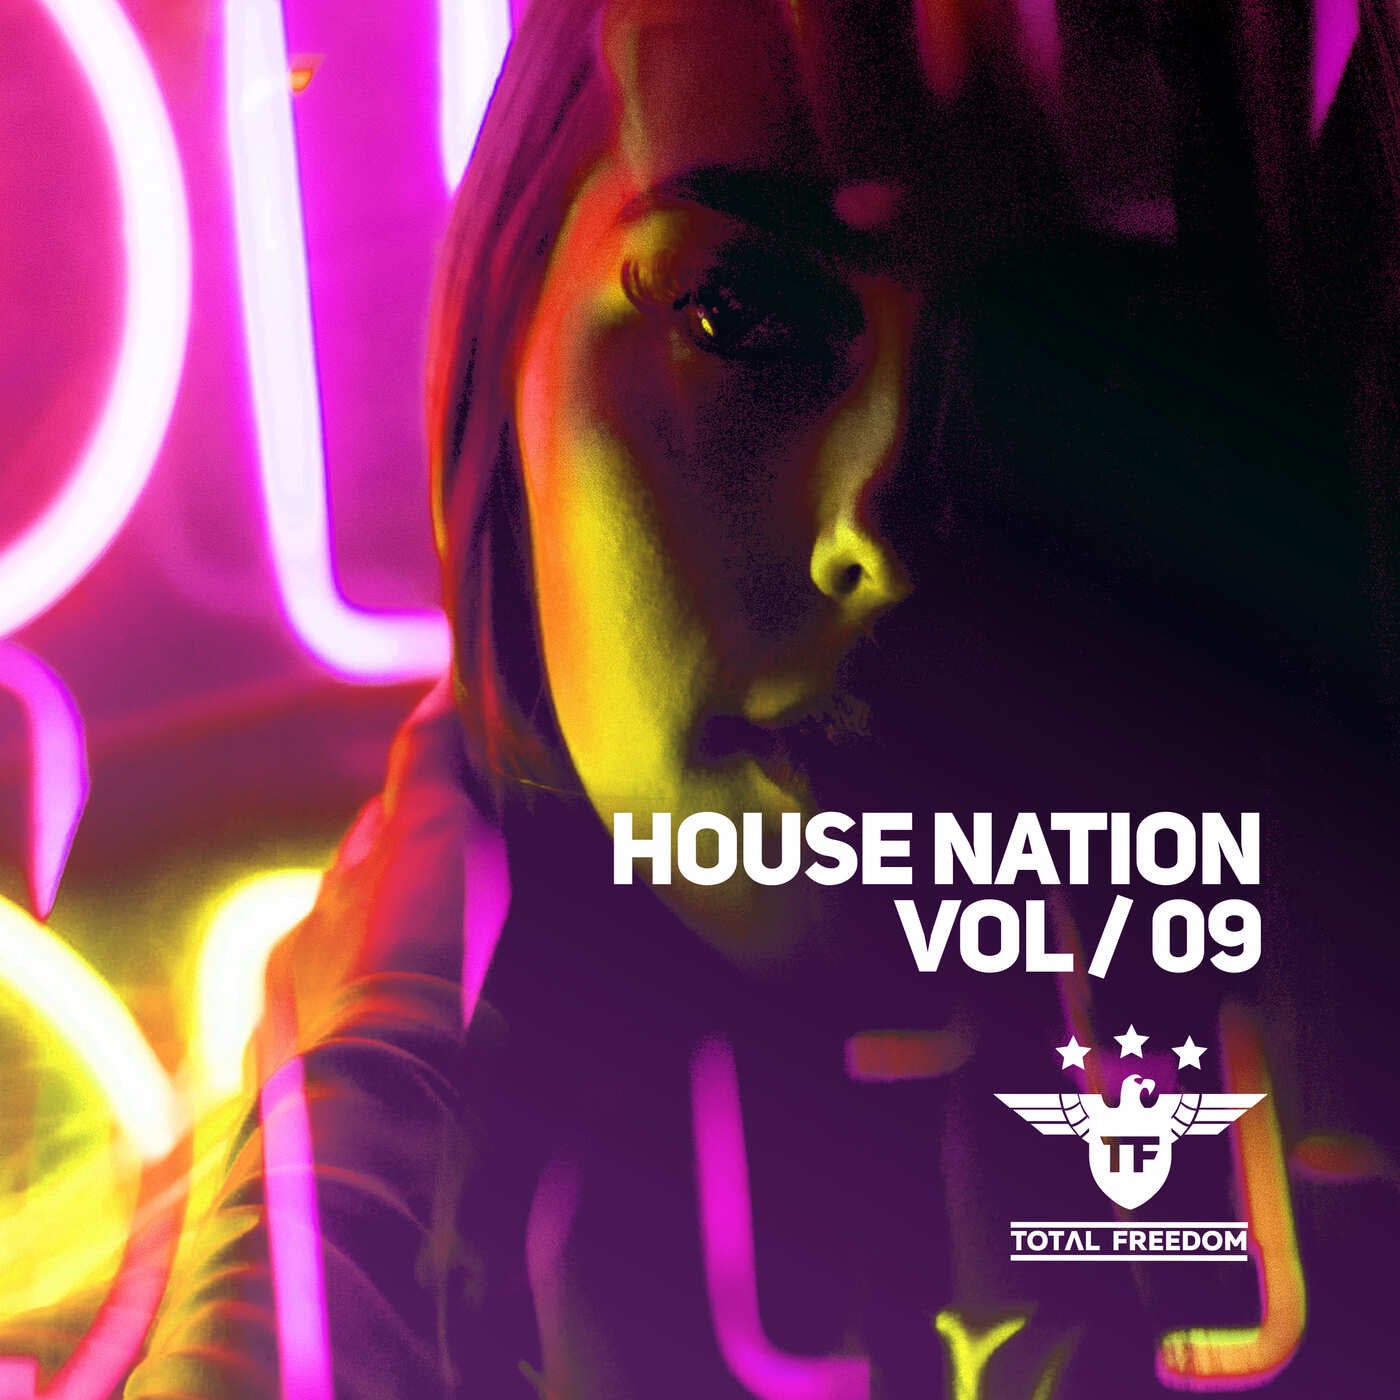 House Nation Vol. 09